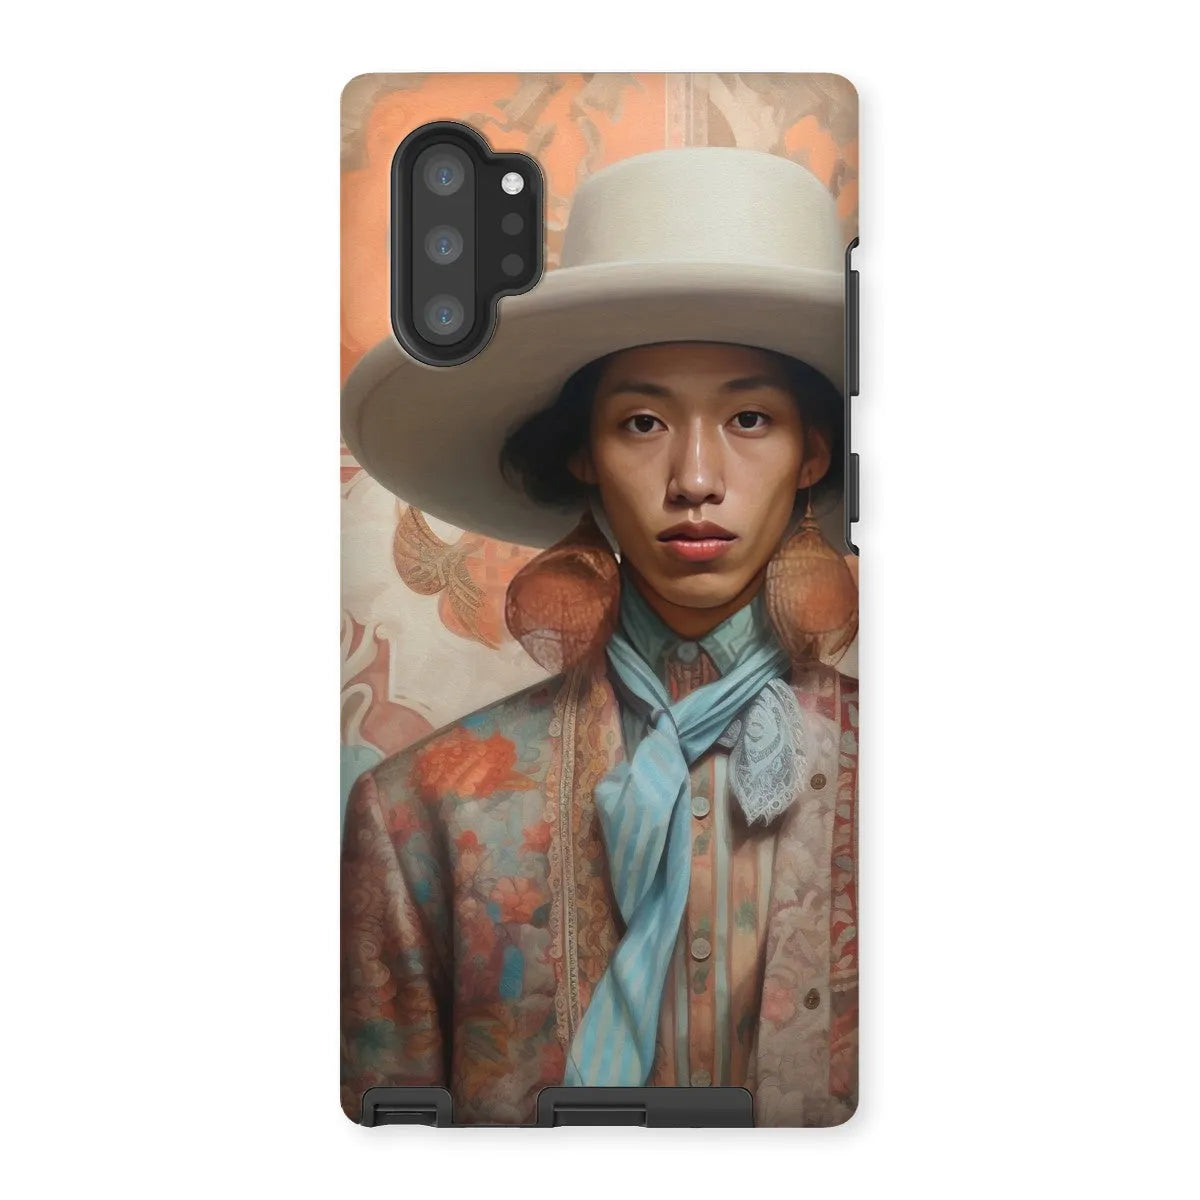 Iyaan The Gay Cowboy - Dandy Gay Aesthetic Art Phone Case - Samsung Galaxy Note 10p / Matte - Mobile Phone Cases